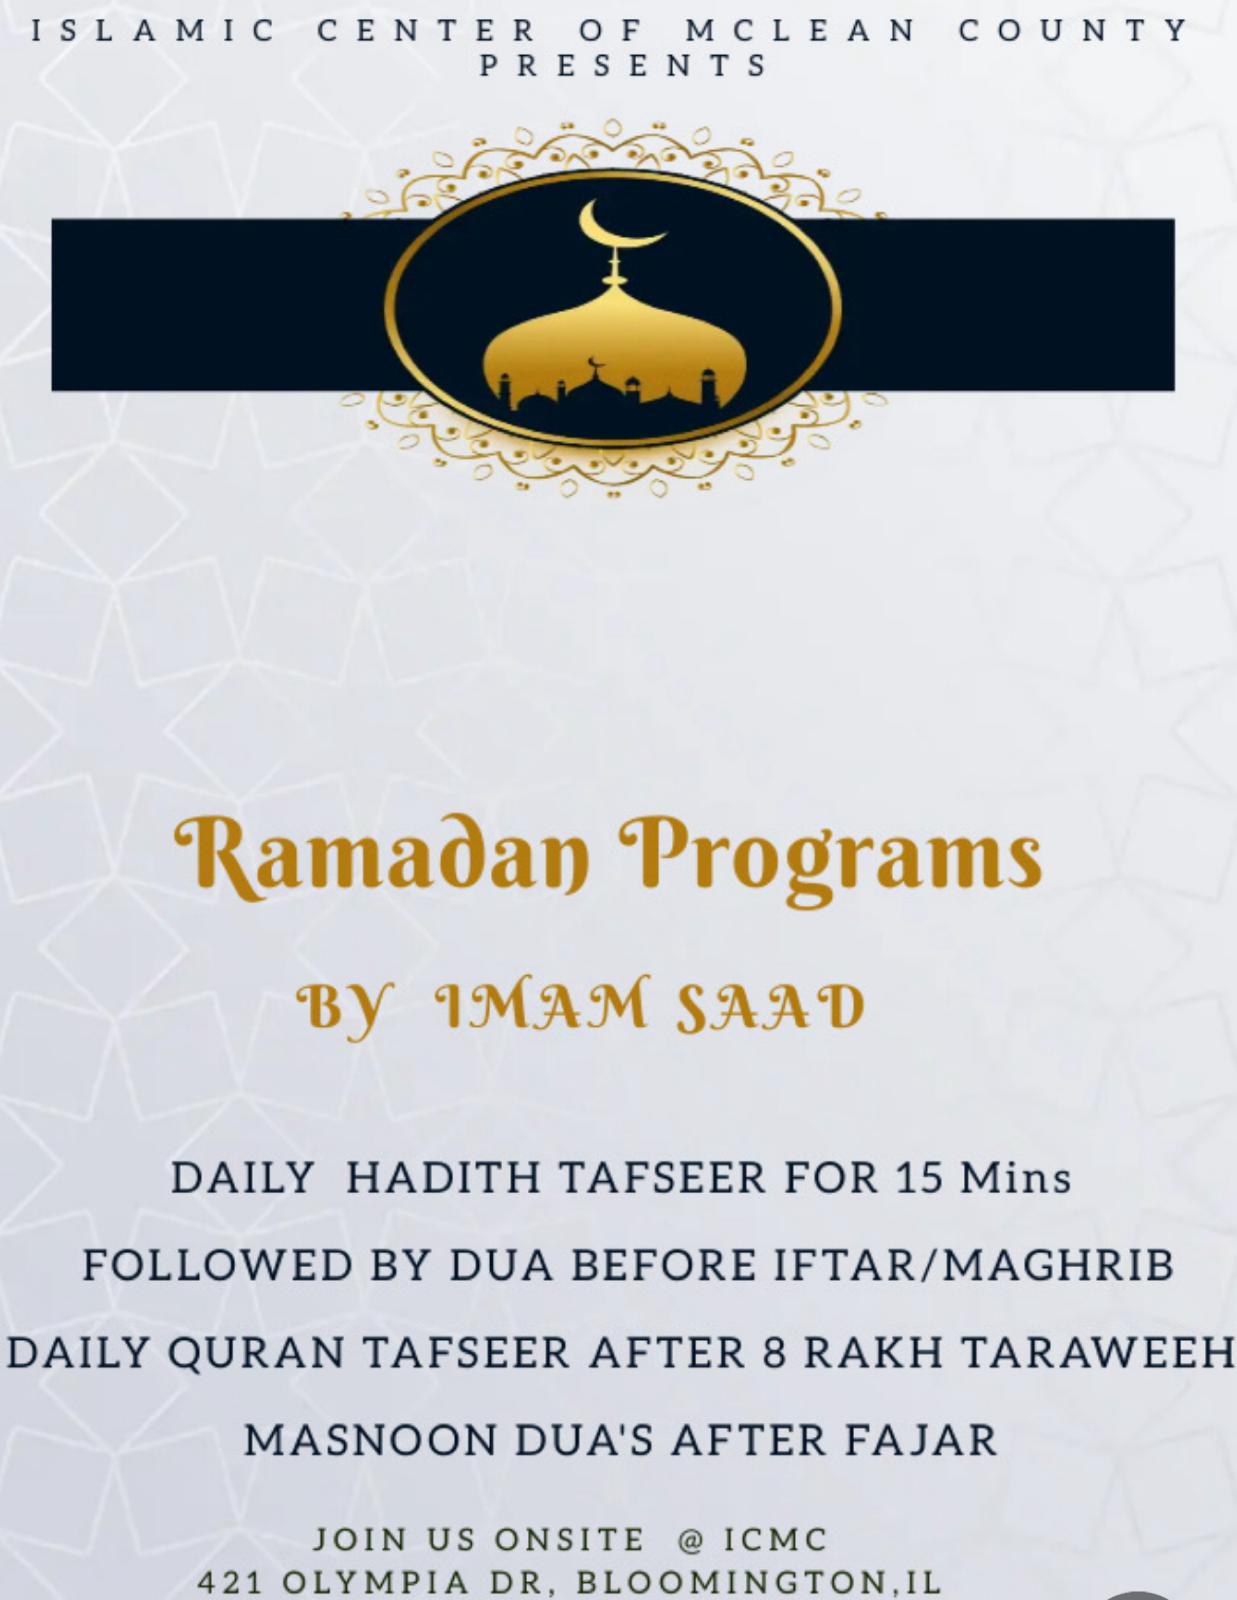 ICMC programs for the month of Ramadan. 